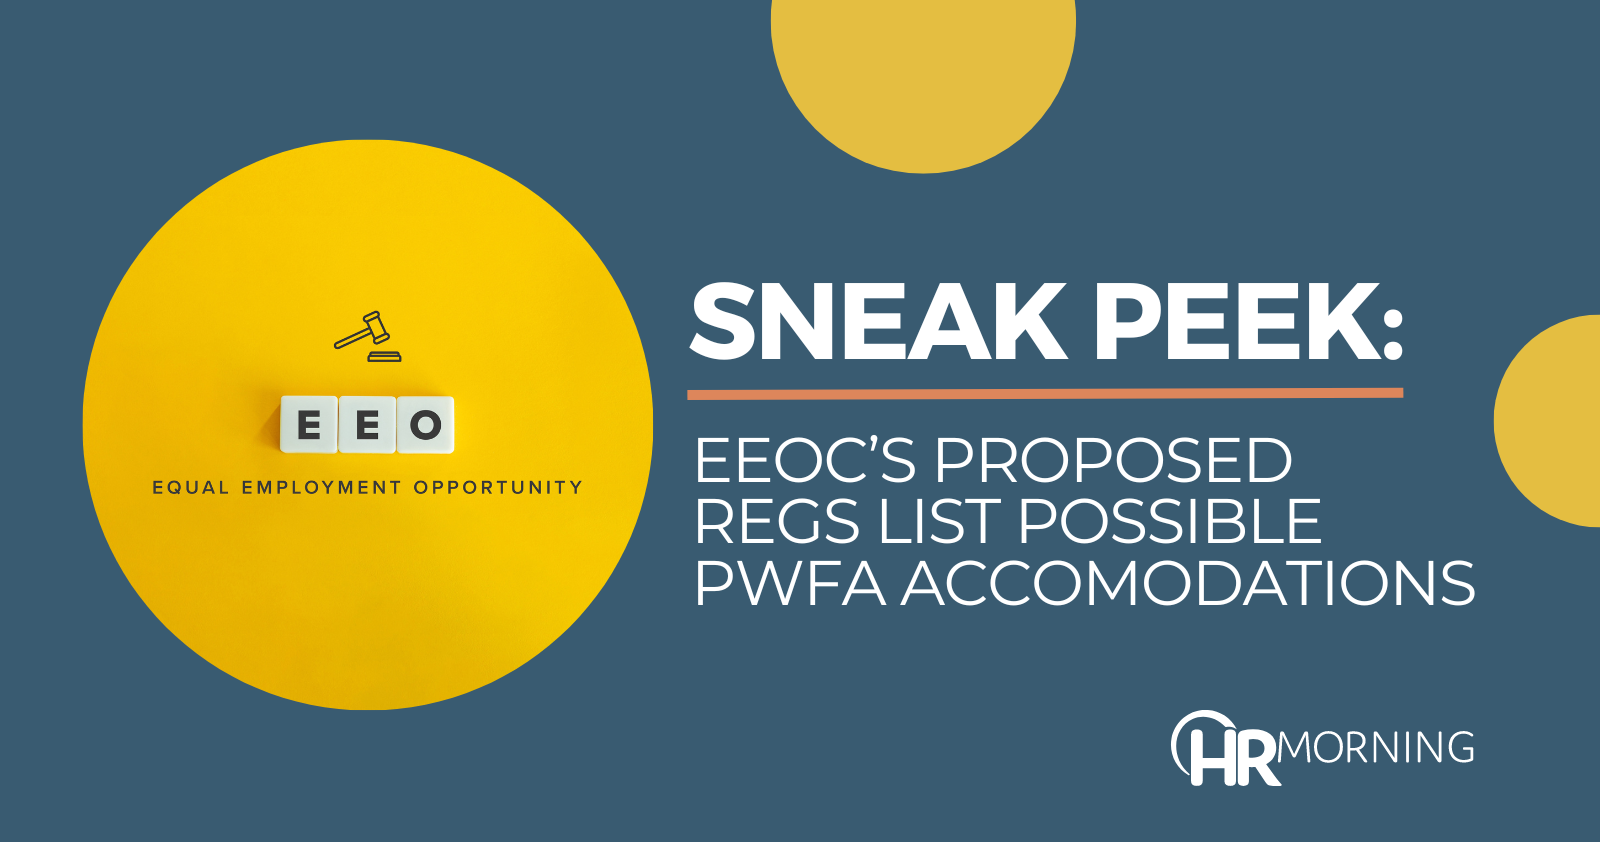 Sneak peek: EEOC’s proposed regs list possible PWFA accommodations and more